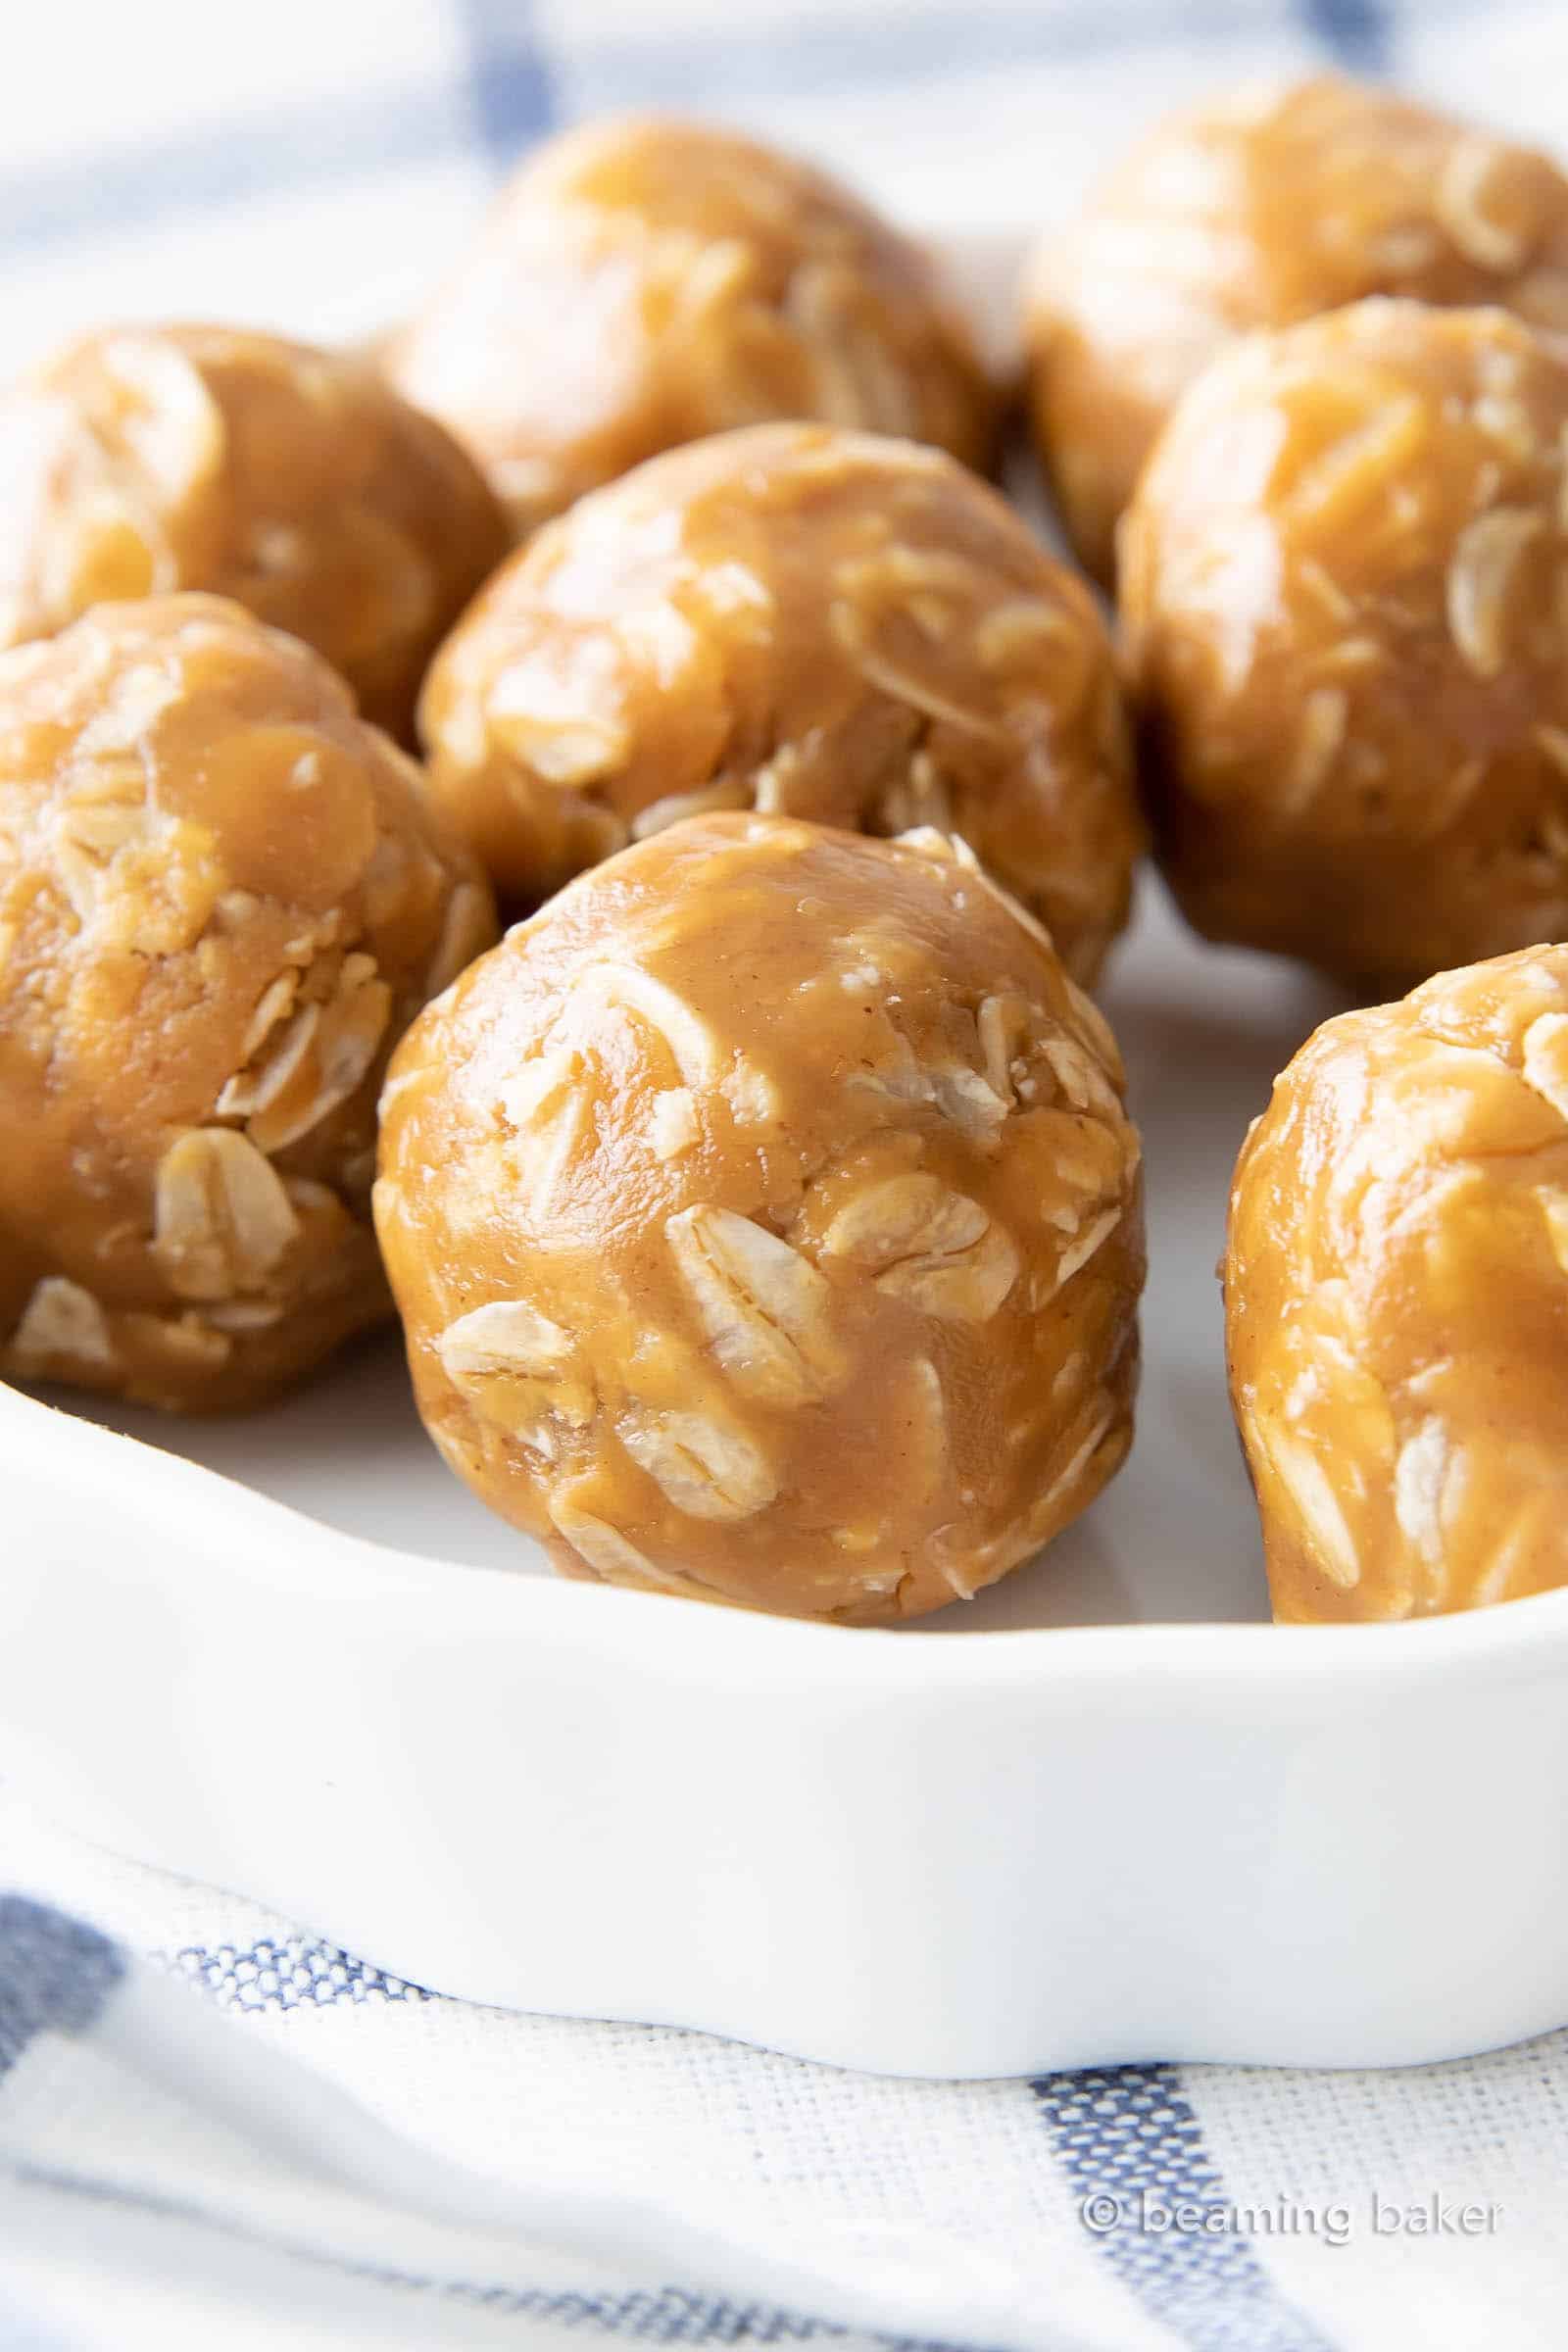 3 Ingredient Peanut Butter Oatmeal Balls: this easy recipe for no bake peanut butter oatmeal balls yields soft & satisfying oatmeal balls bursting with peanut butter flavor! #NoBake #3Ingredient #PeanutButter #Oatmeal | Recipe at BeamingBaker.com